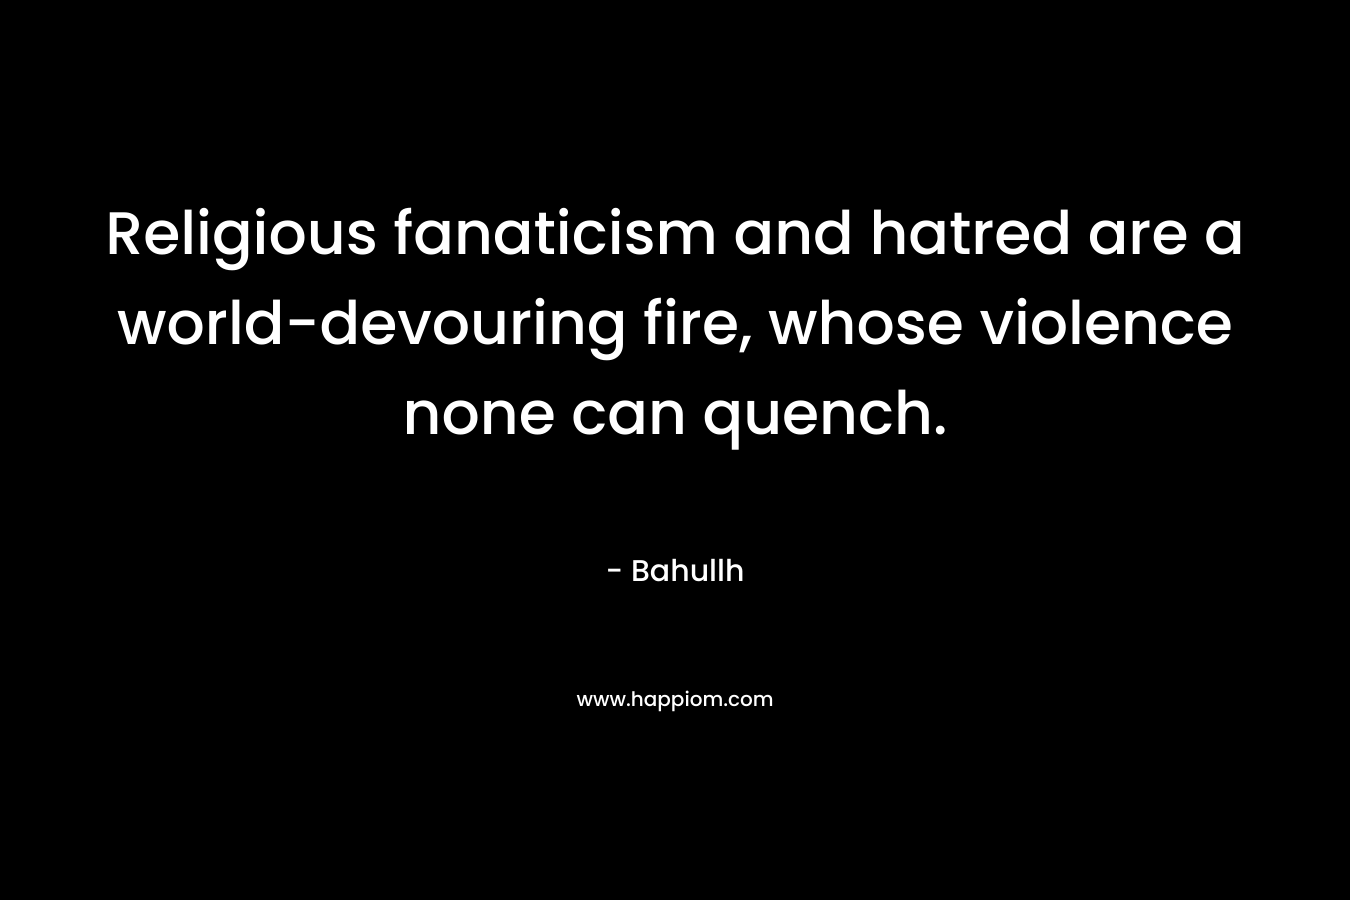 Religious fanaticism and hatred are a world-devouring fire, whose violence none can quench.